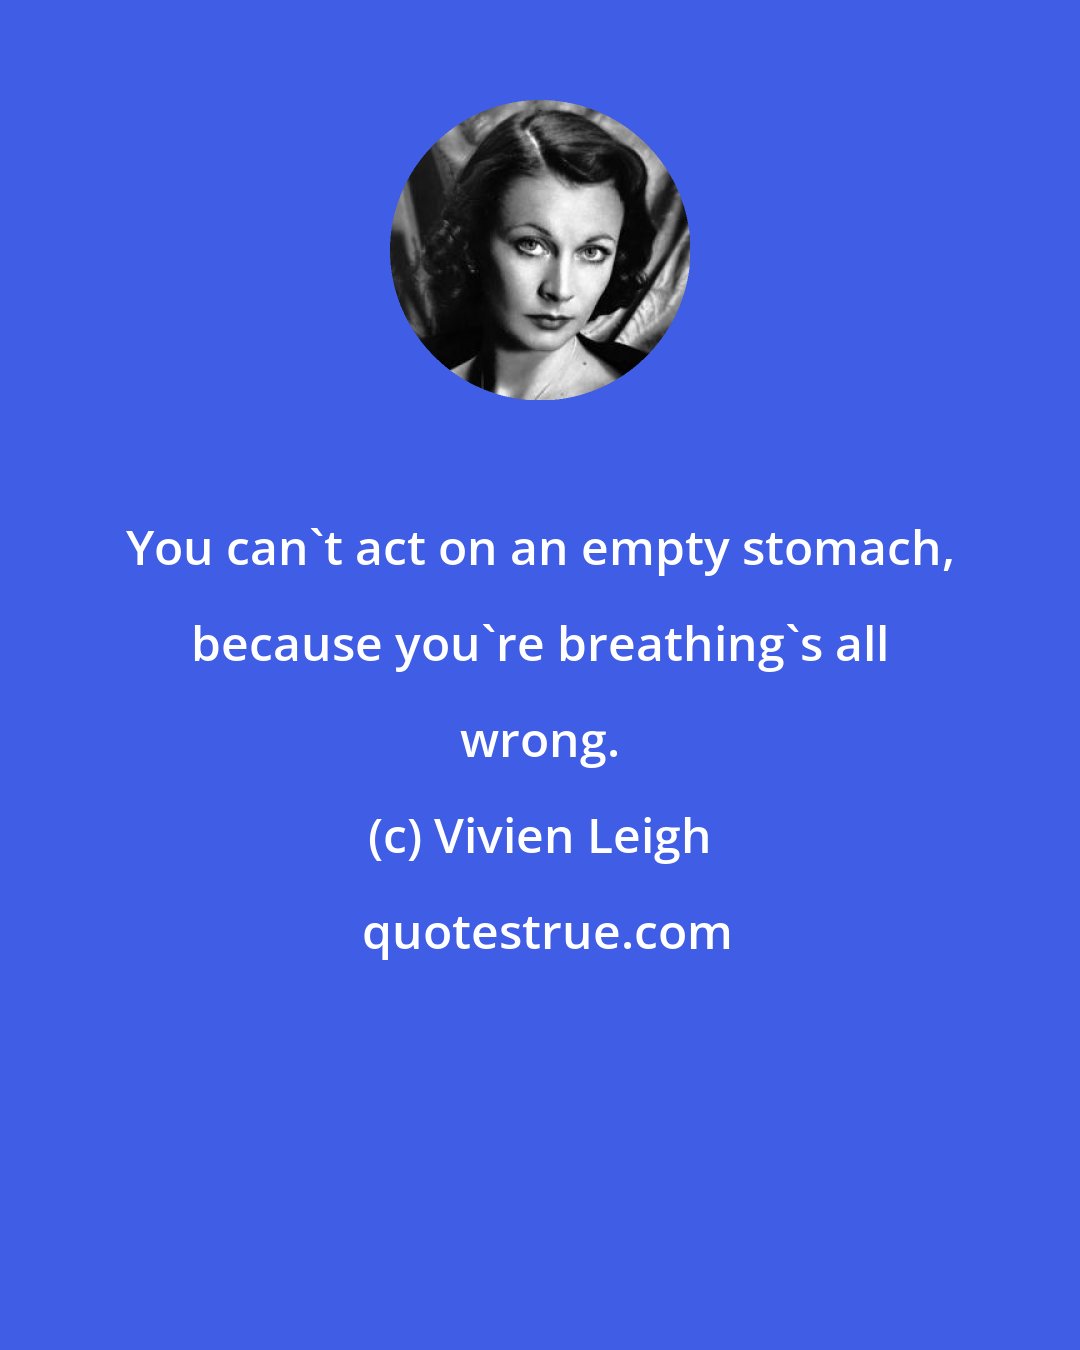 Vivien Leigh: You can't act on an empty stomach, because you're breathing's all wrong.